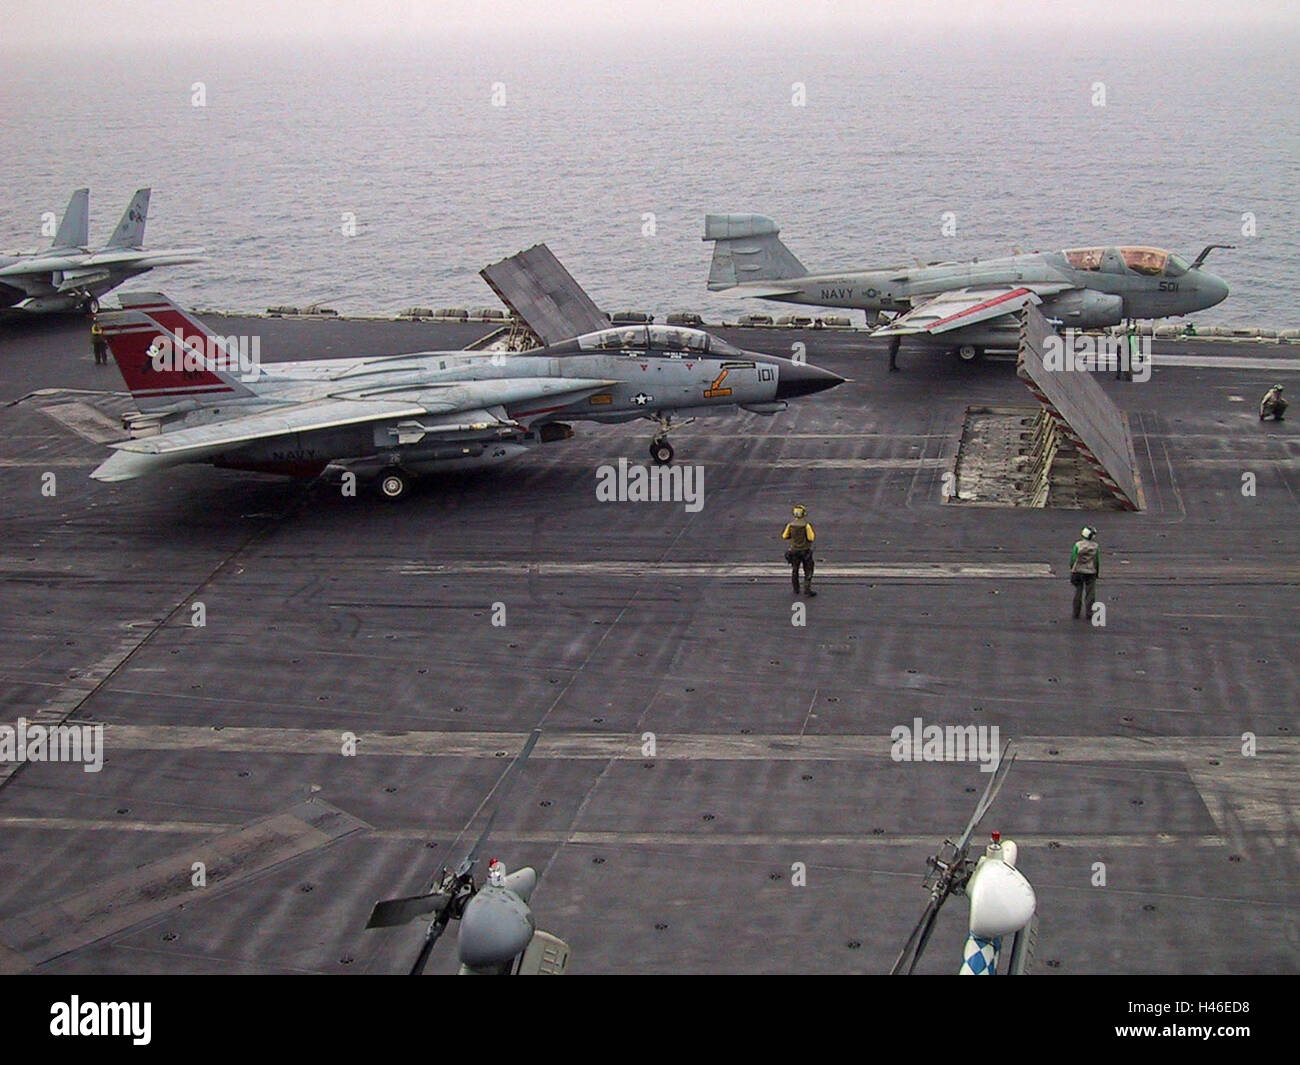 22nd March 2003 Operation Iraqi Freedom: an F-14 Tomcat & an EA-6B Prowler shortly to take-off from the USS Abraham Lincoln. Stock Photo